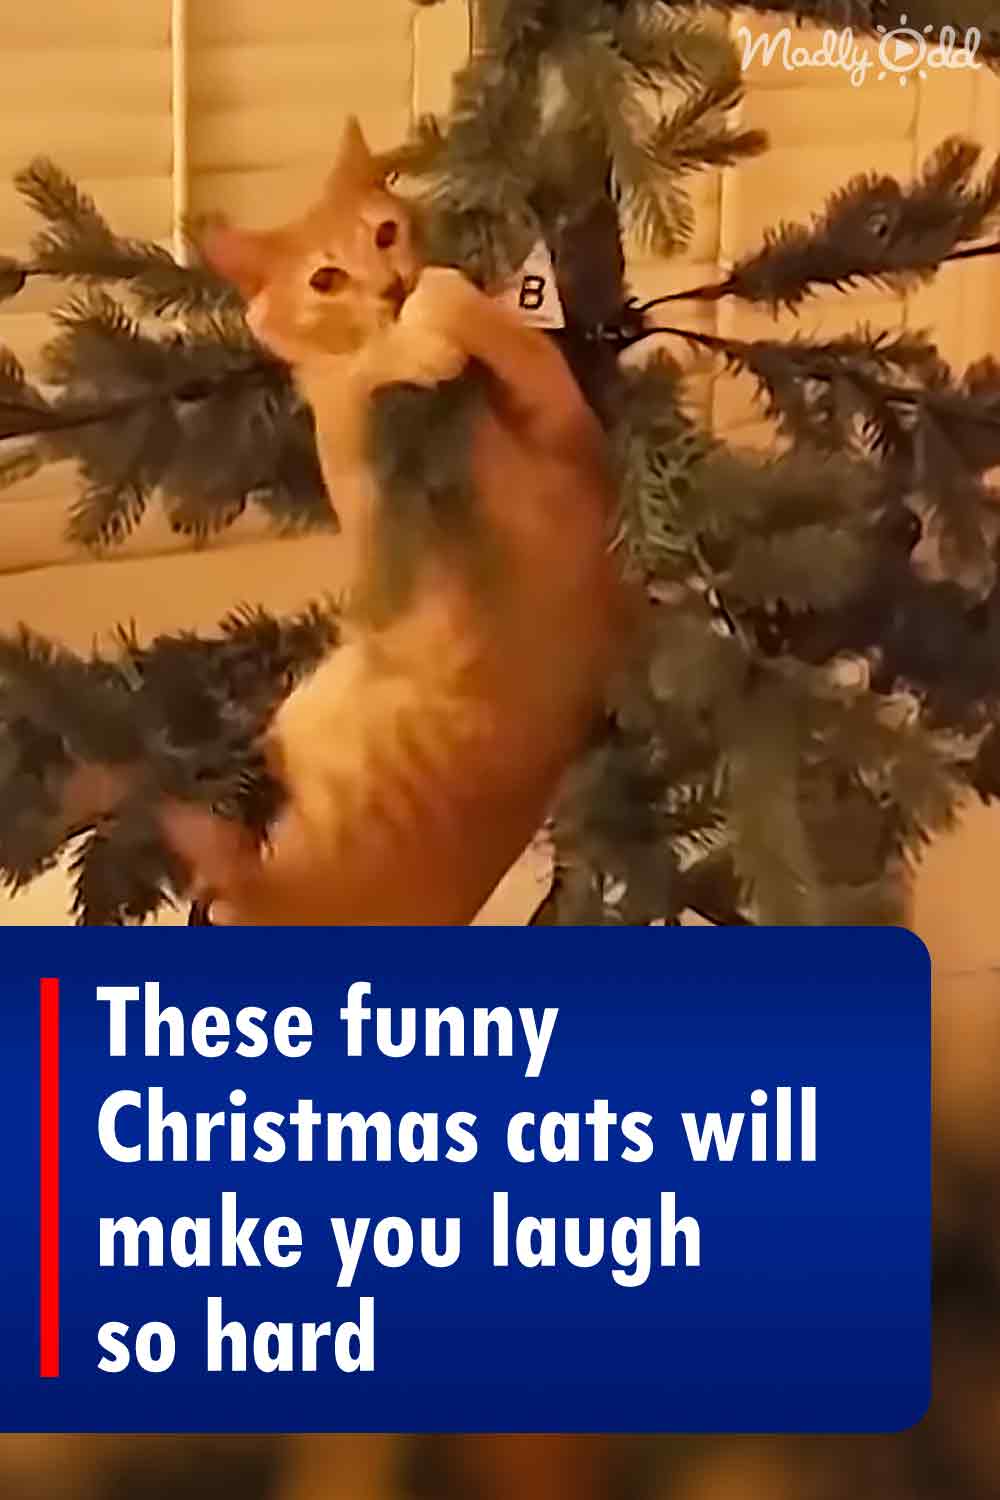 These funny Christmas cats will make you laugh so hard